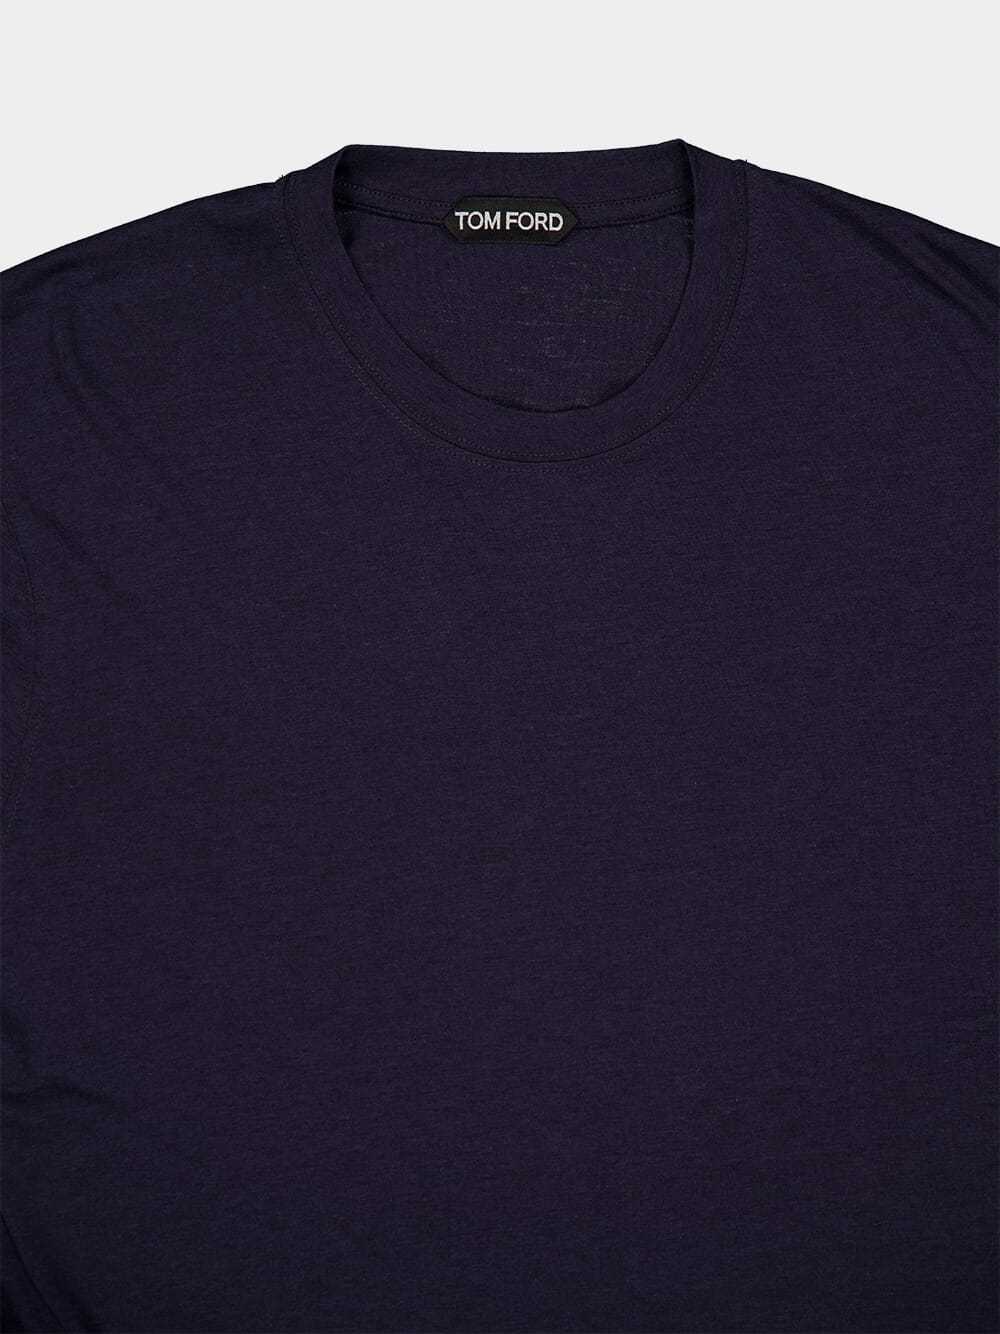 Tom FordLyocell Cotton Crew Tee at Fashion Clinic